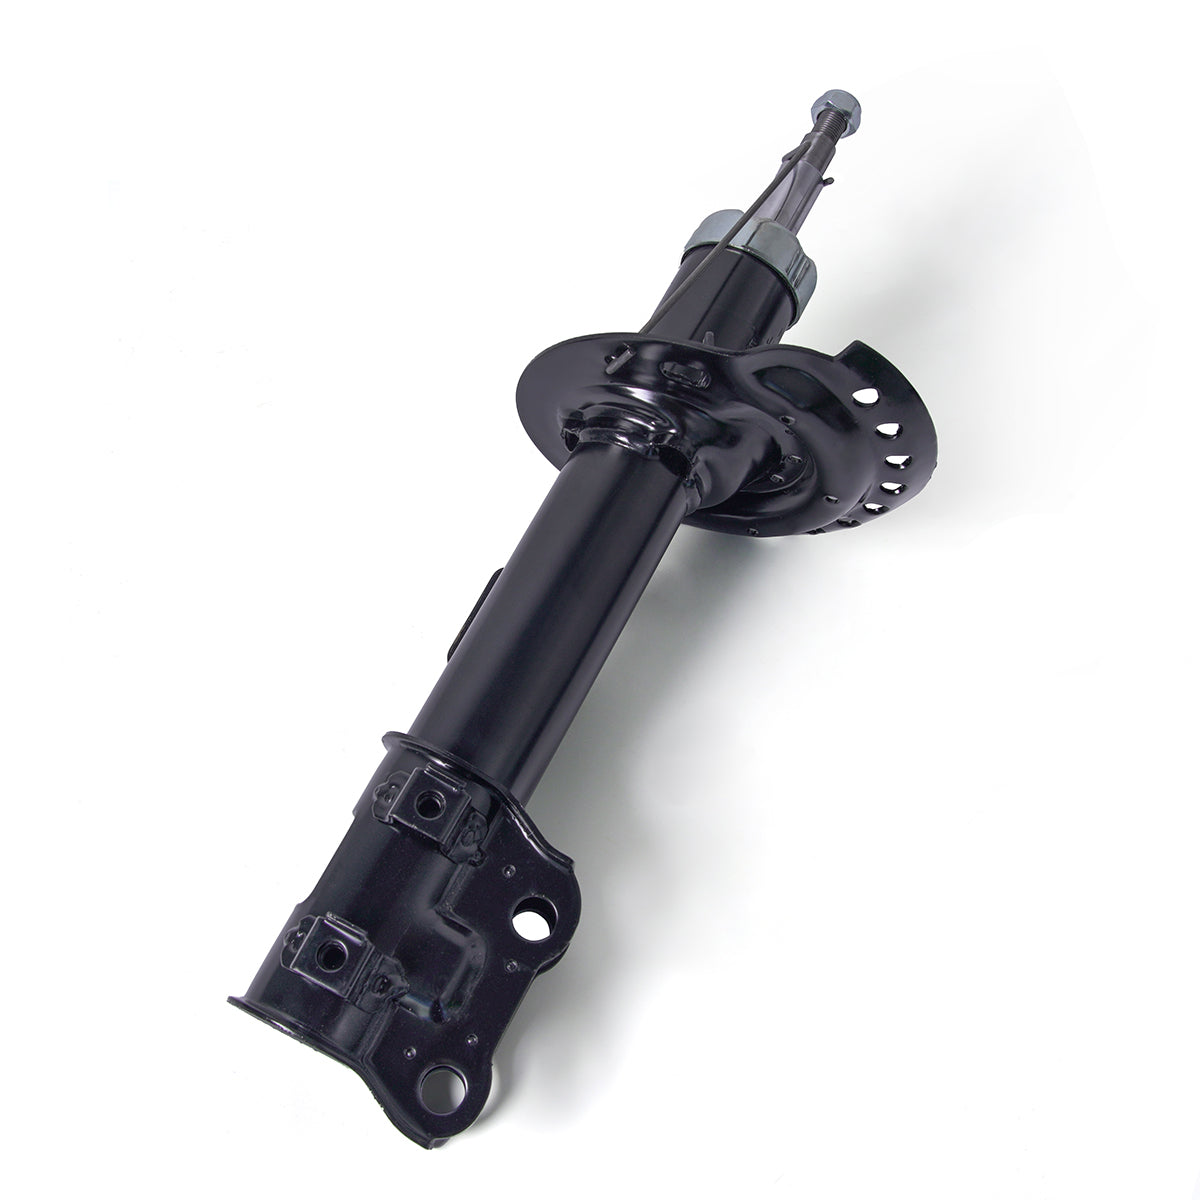 The Loosoo car shock absorber replacement has a more flexible valve system design than the original shock absorber and produces low wear and long life in strict accordance with OEM standards, making the car safer, more comfortable, and more controllable, to offer a stable, and noiseless ride.